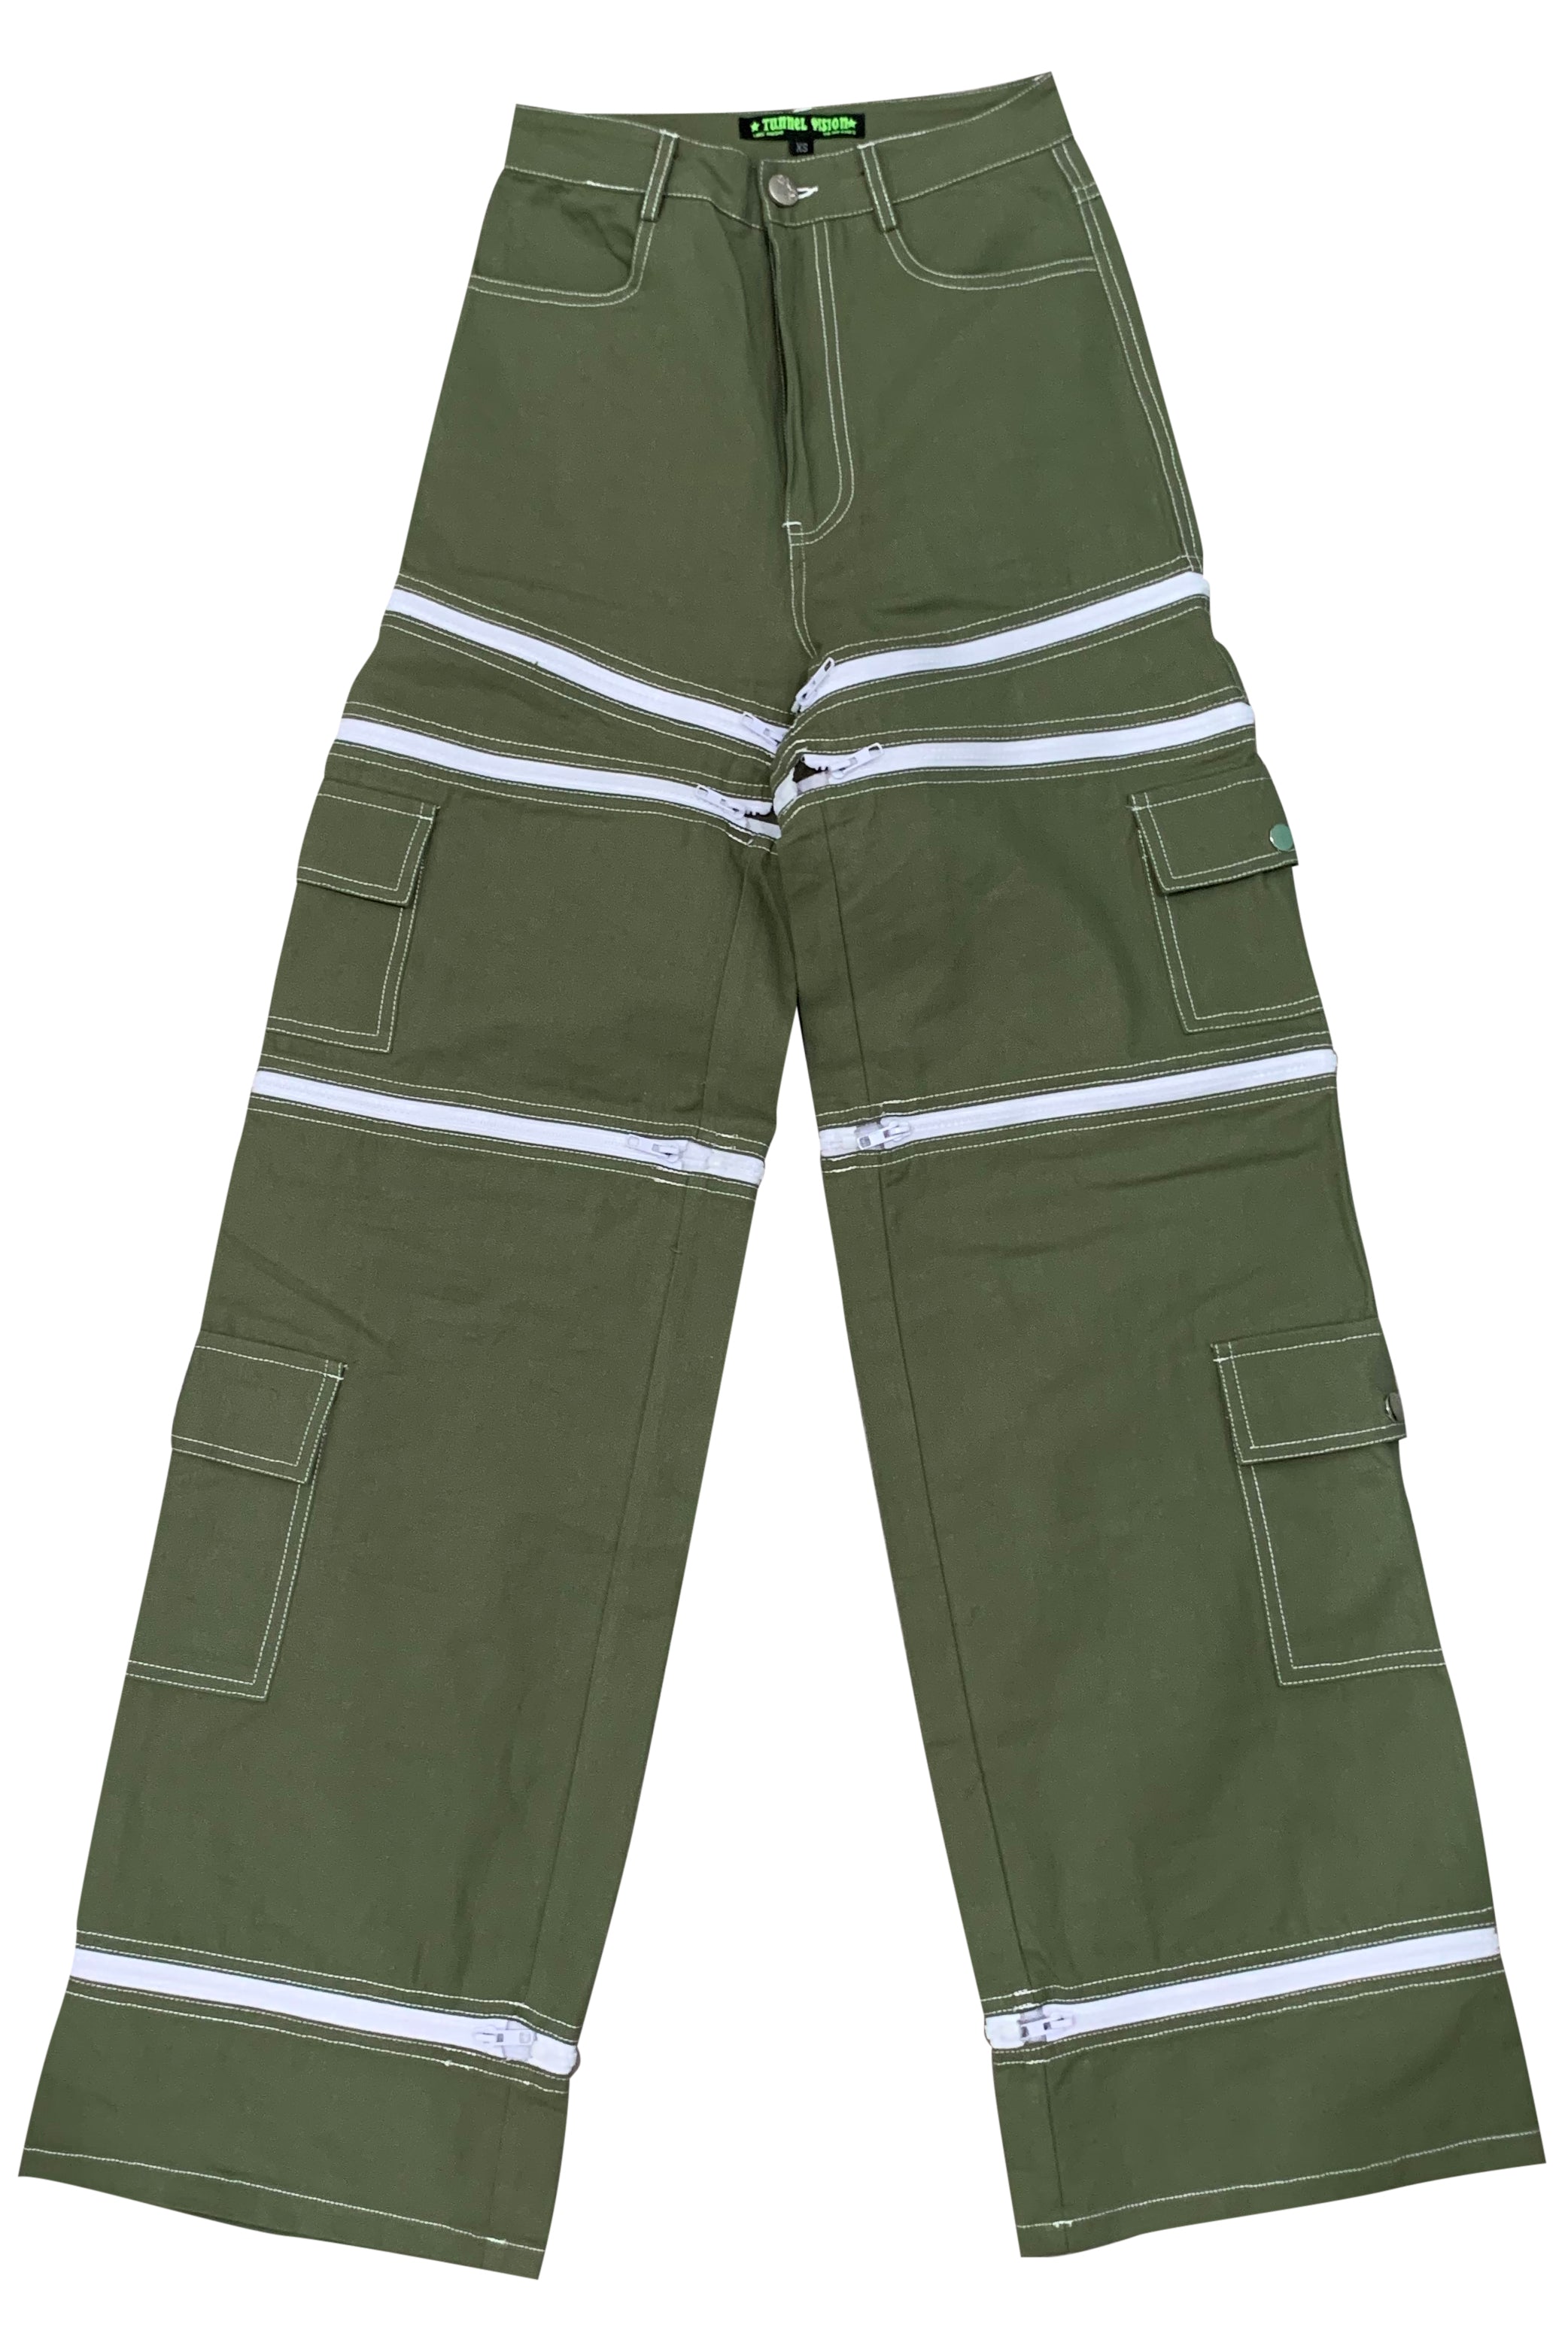 Olive Green 5-in-1 Convertible Zip-Off Cargo Pants – Tunnel Vision